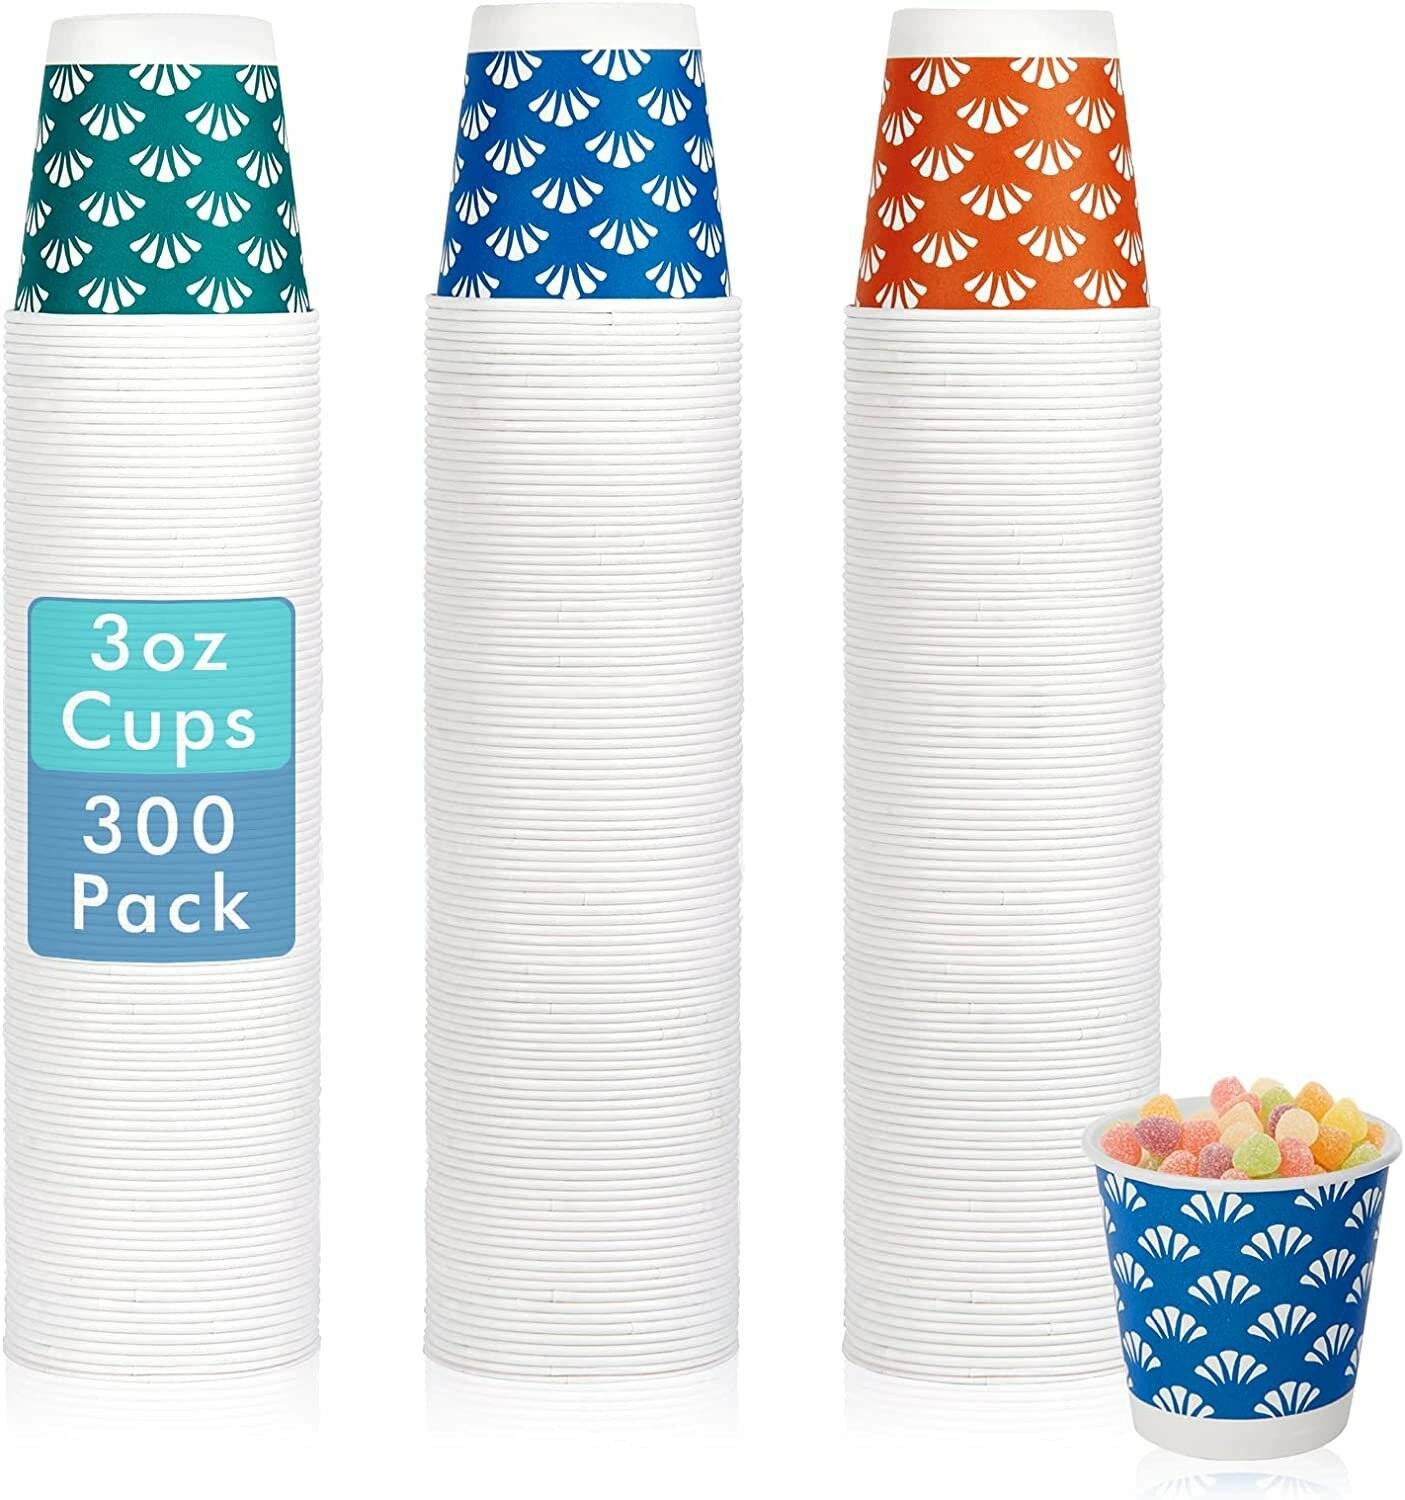 600 Pack 3 oz Paper Cups for Bathroom, Mouthwash, Disposable